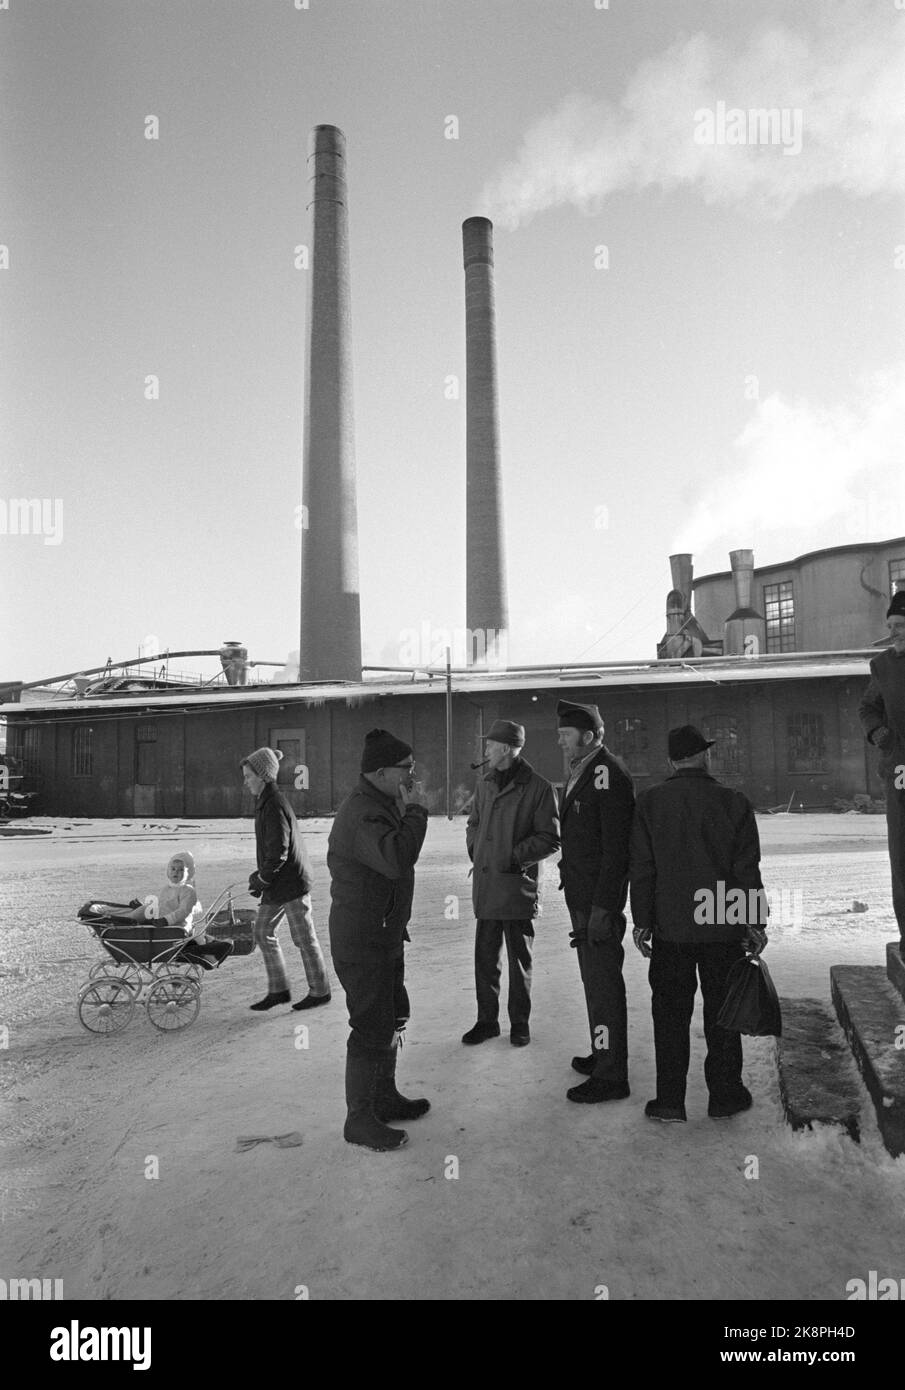 Vestfossen 19701212 The wheels are on Vestfossen. The layoffs at Vestfos Cellulose Factory came as a shock to the employees, as did the bankruptcy. Poor treatment of the employees. Environmental images from the last working days before the company closed its doors. Clusters of workers stand outside the factory and discuss the situation. Woman with stroller in the background. Photo; Sverre A. Børretzen / Current / NTB Stock Photo